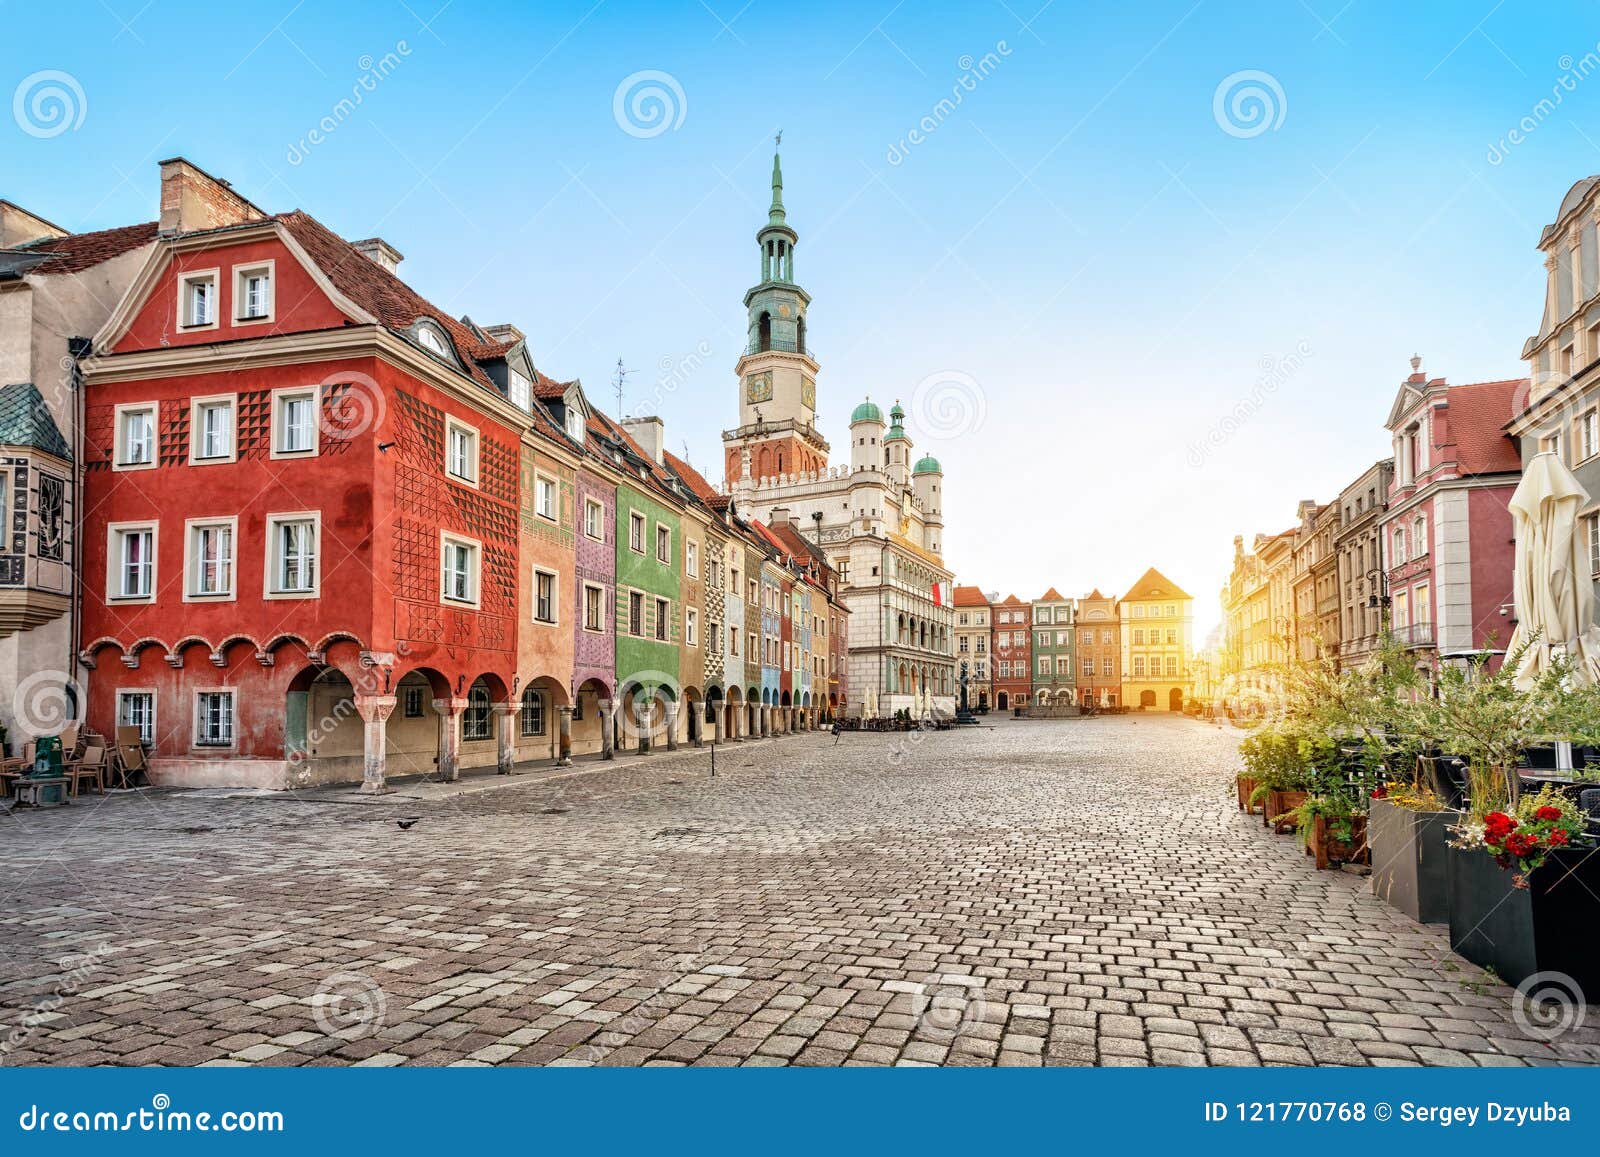 stary rynek square and old town hall in poznan, poland